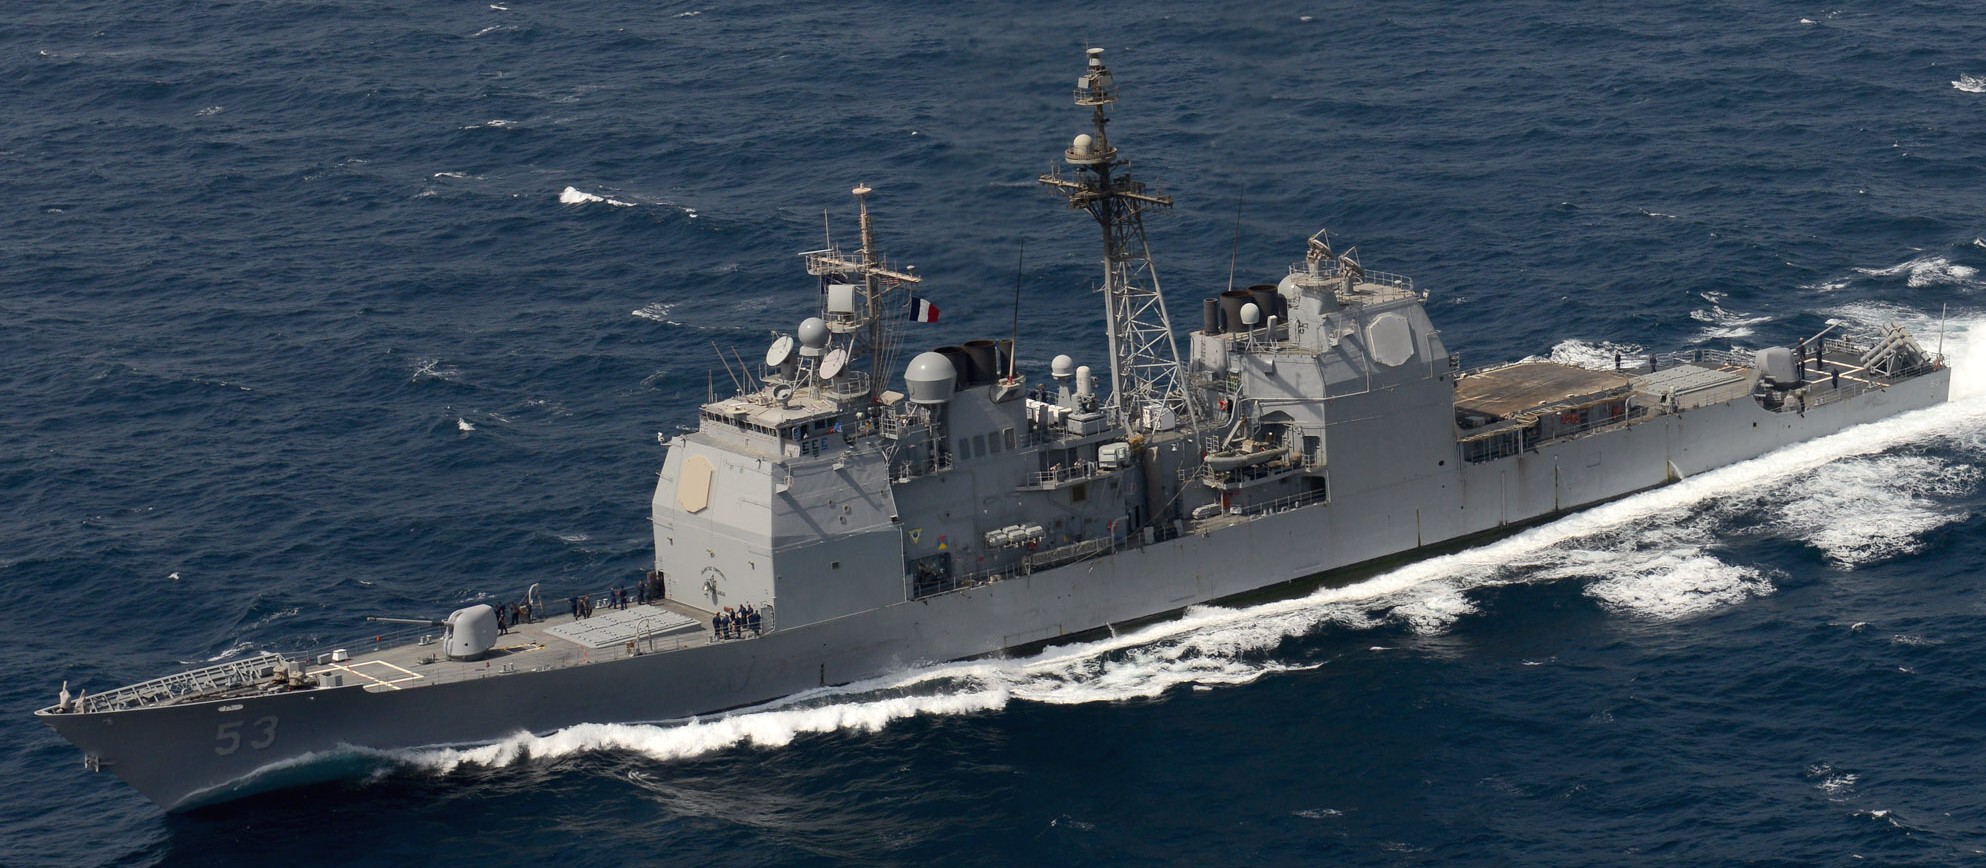 cg-53 uss mobile bay ticonderoga class guided missile cruiser aegis us navy 61